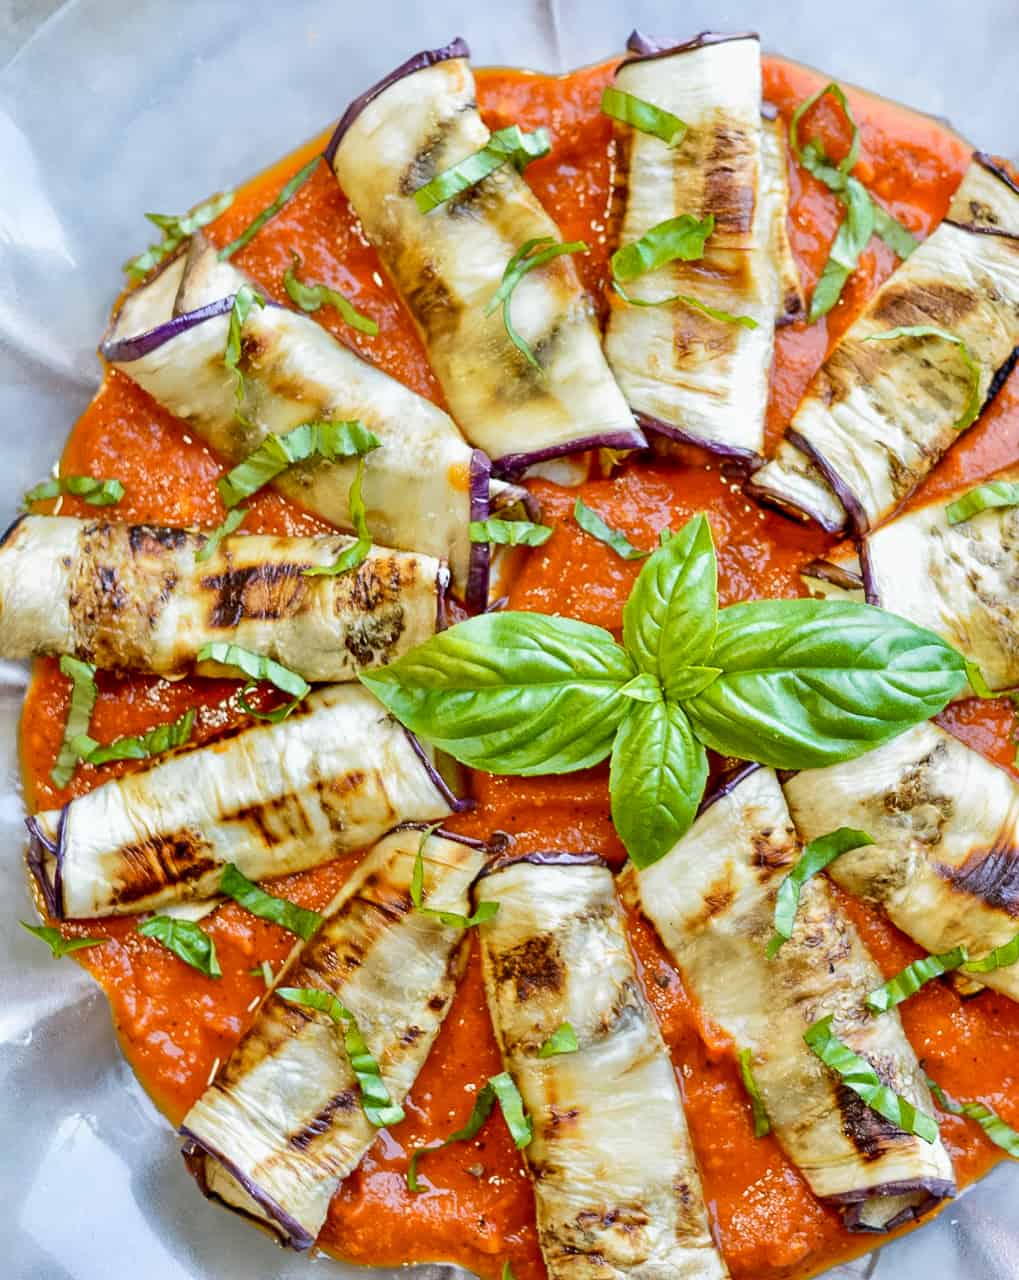 Eggplant Rollatini With Grilled Tomato Sauce Eat Well Enjoy Life,Chicken Parmesan Recipe Food Network